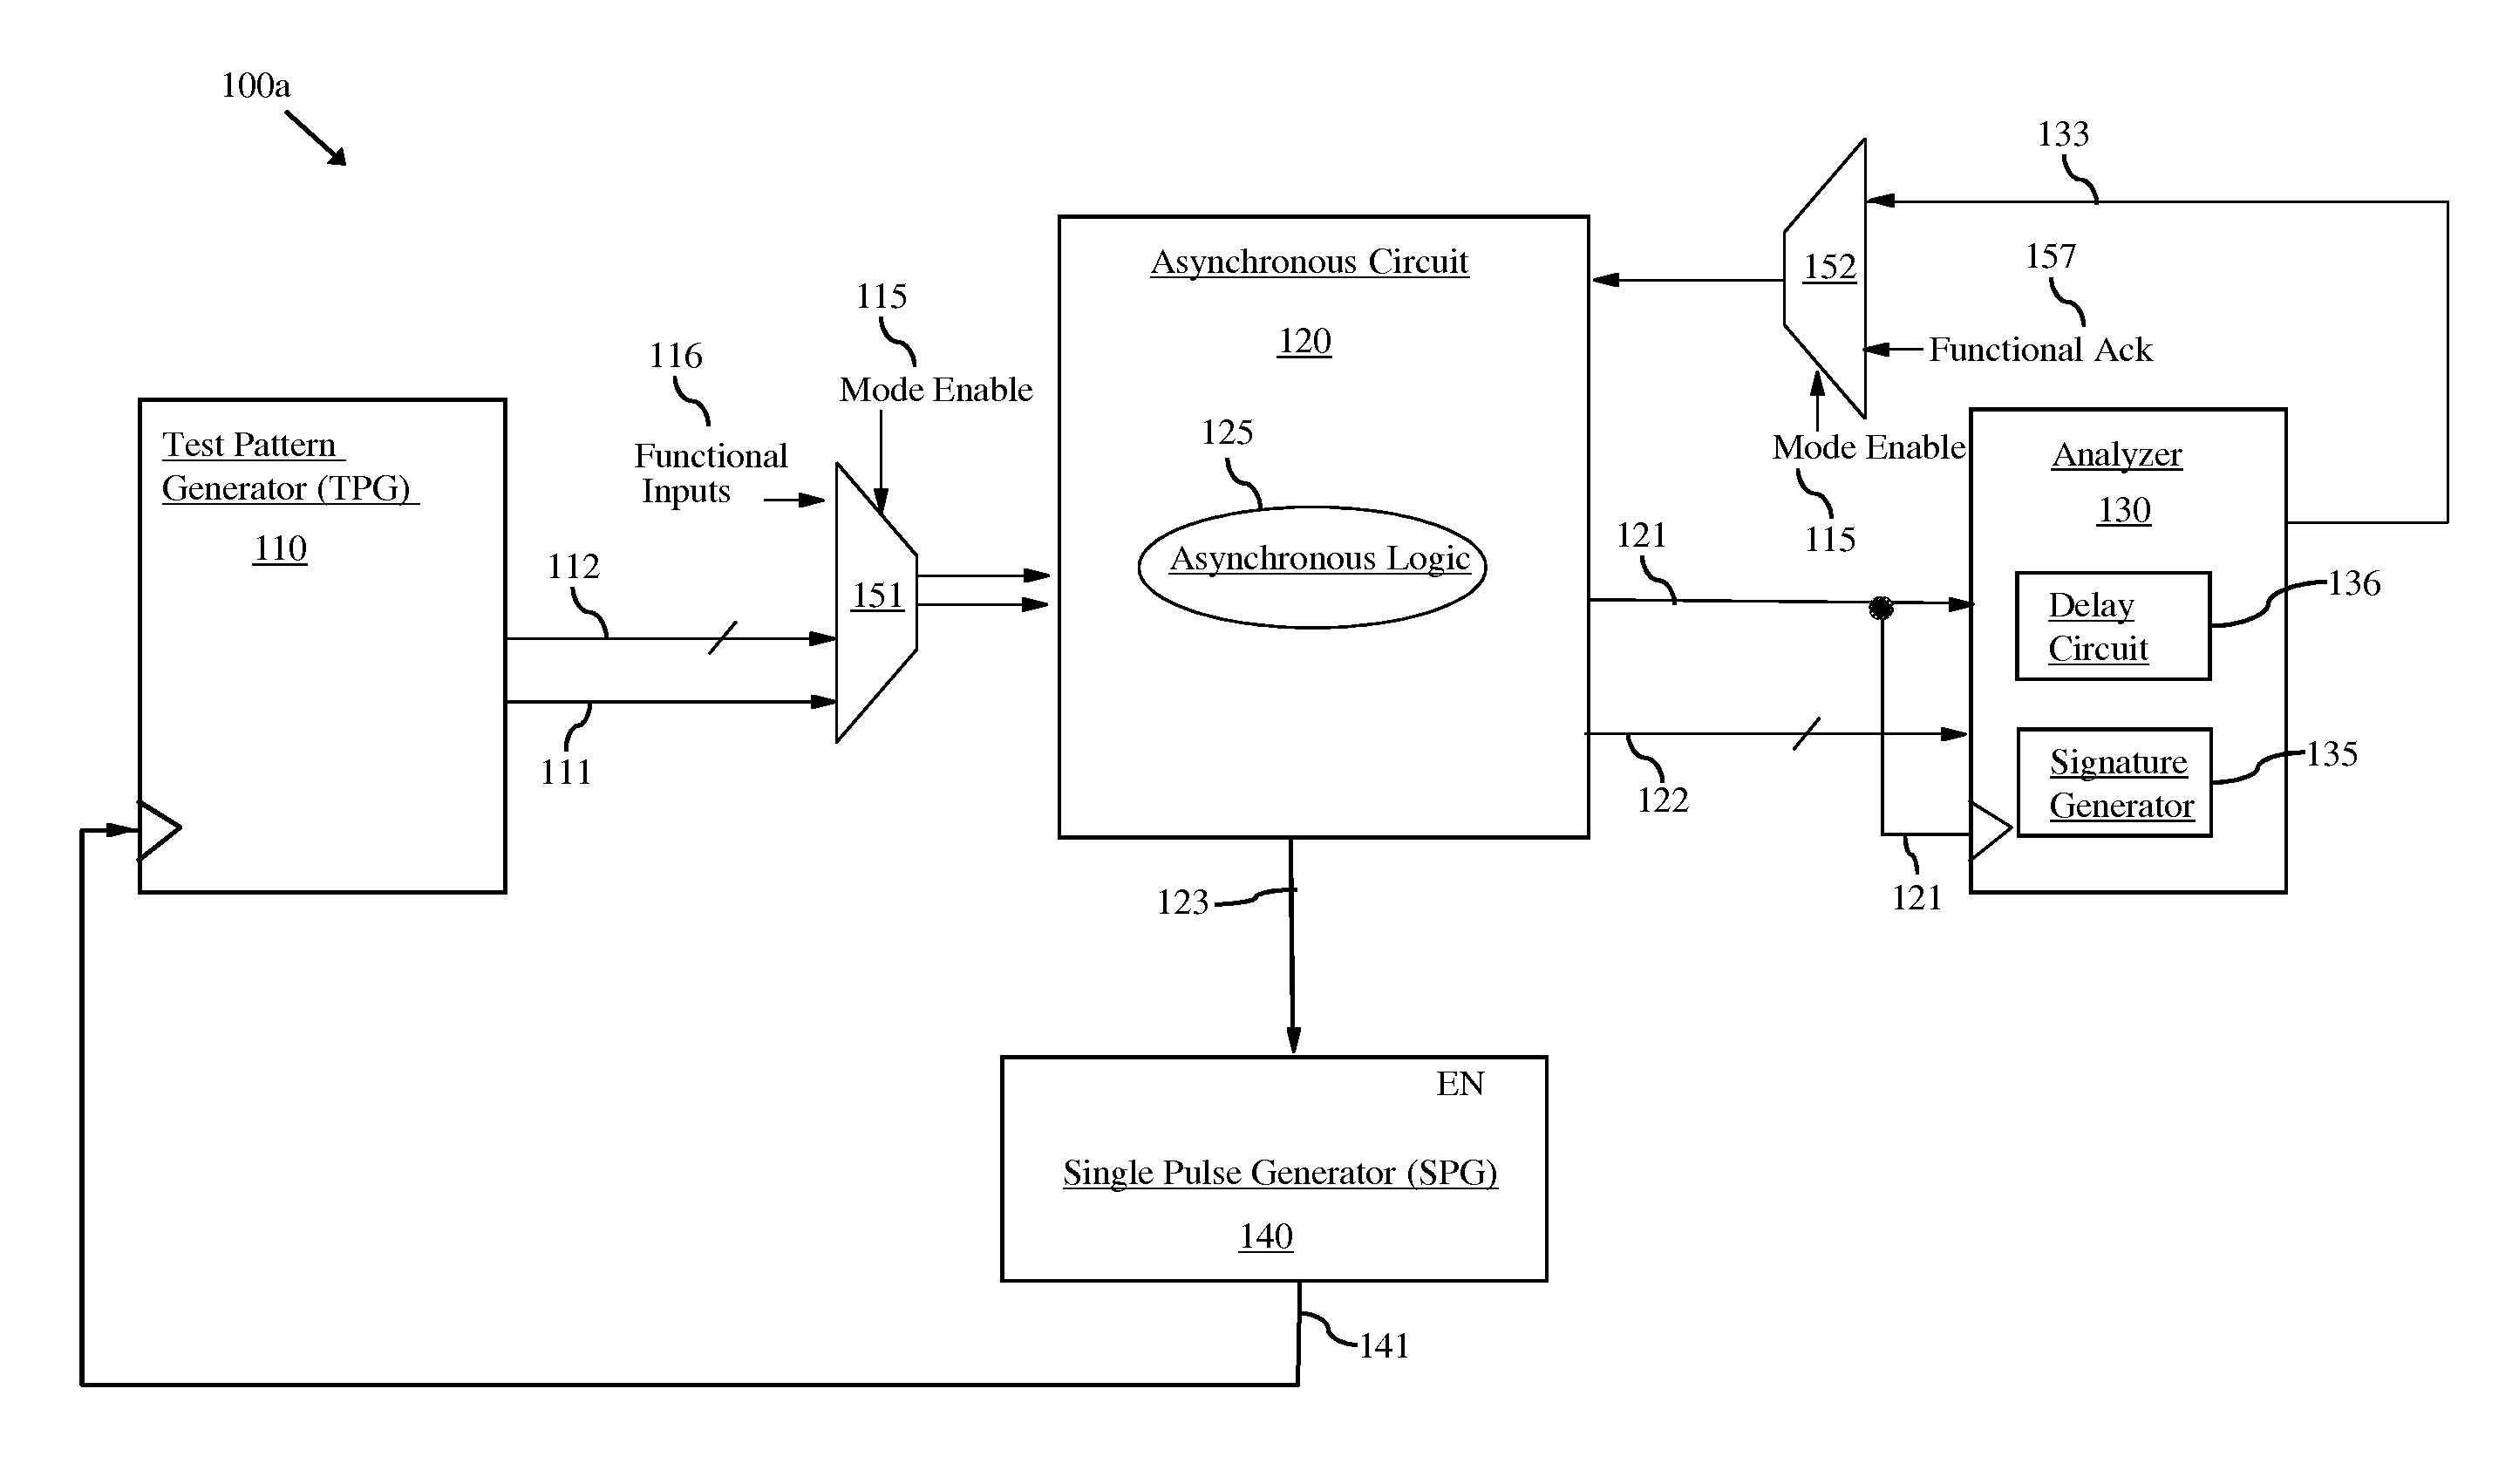 Asynchronous circuit with an at-speed built-in self-test (BIST) architecture